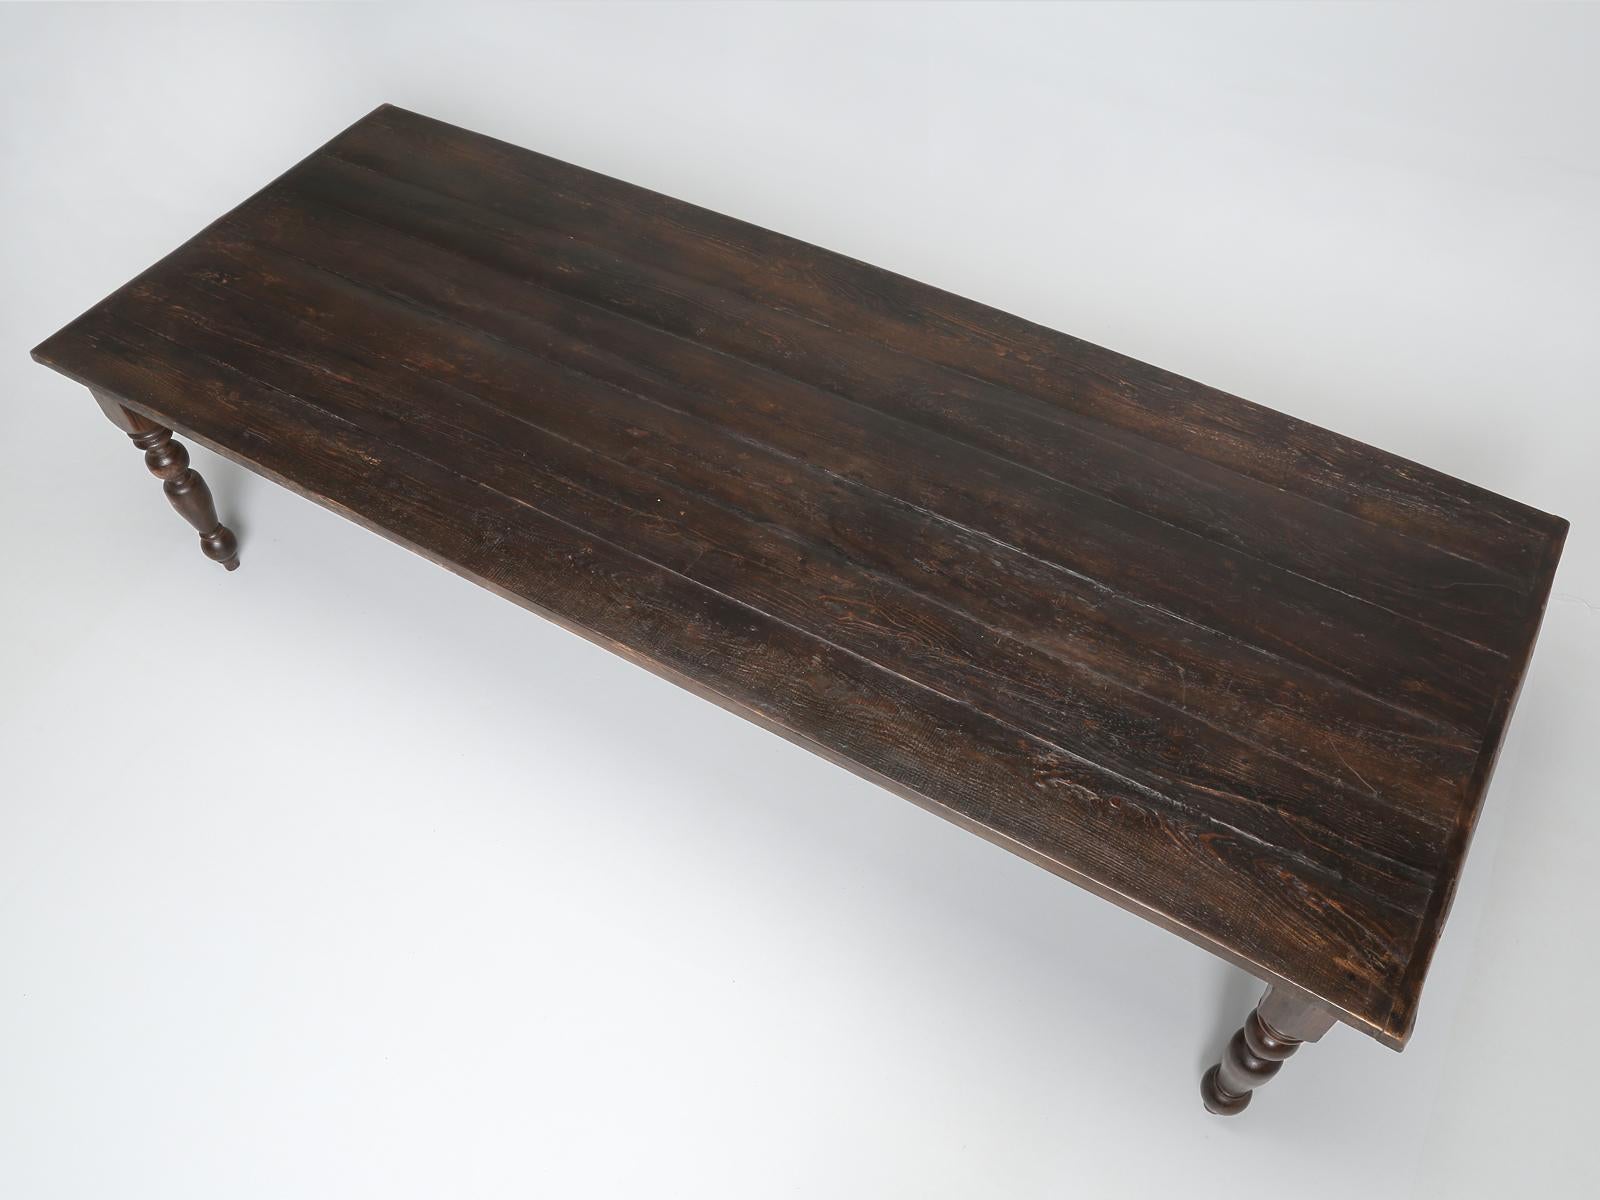 Although we do find large farm tables, they often tend to be on the narrow side and when you discover an antique farm table that is wider than expected, we’re always suspect as to the originality. Surprisingly, this is an authentic antique French